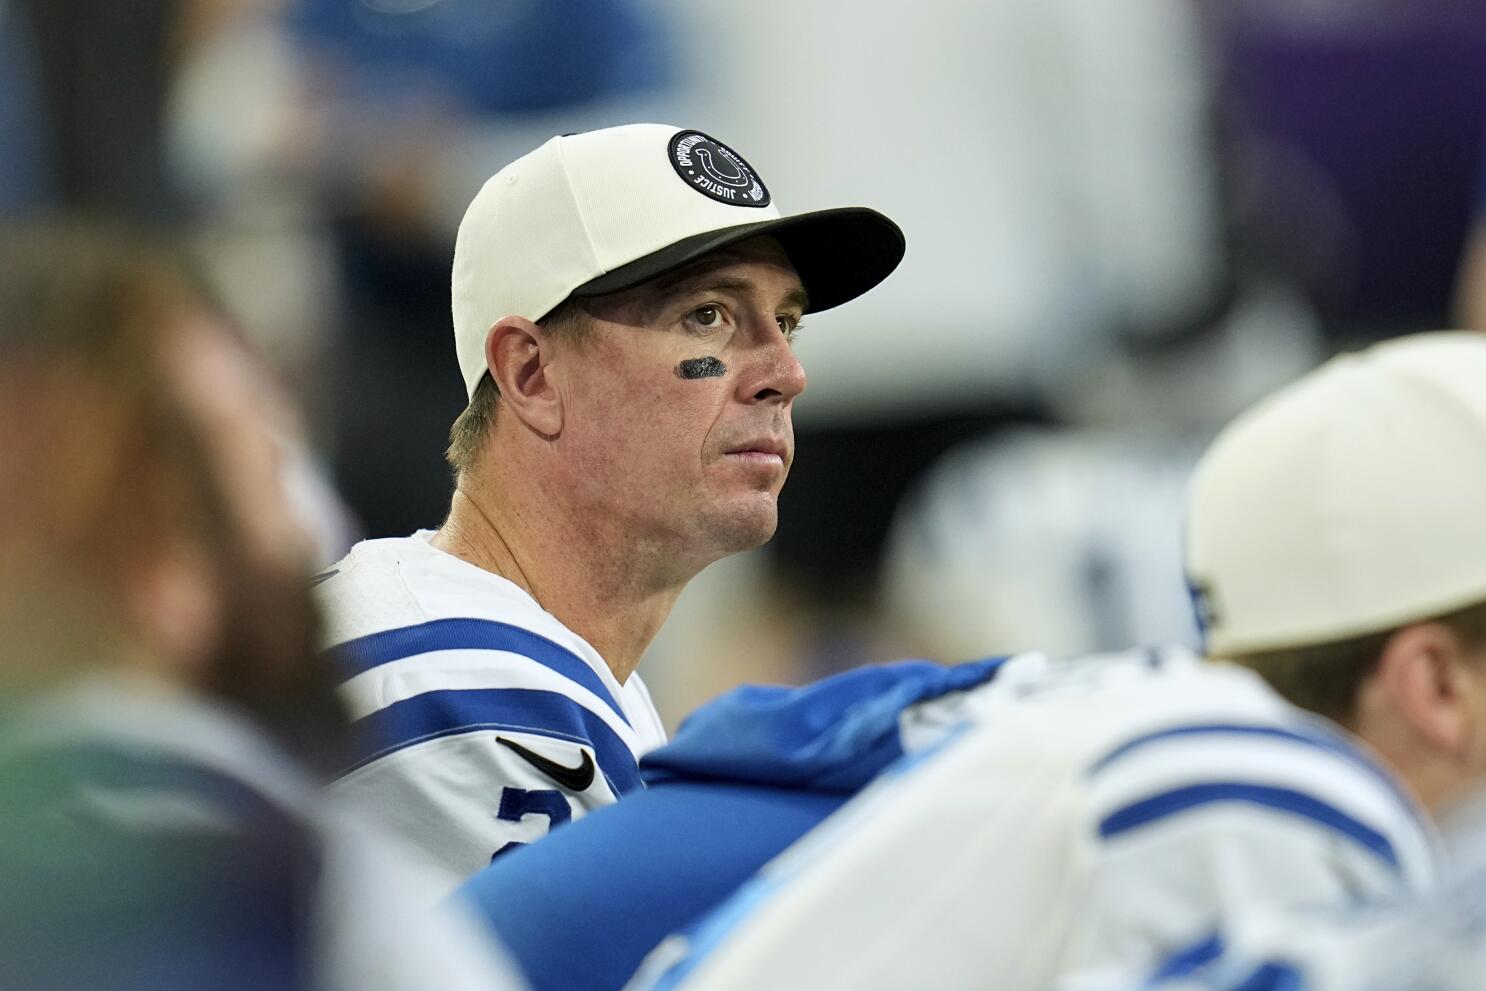 Matt Ryan on the wrong side of history again in Colts' loss - The